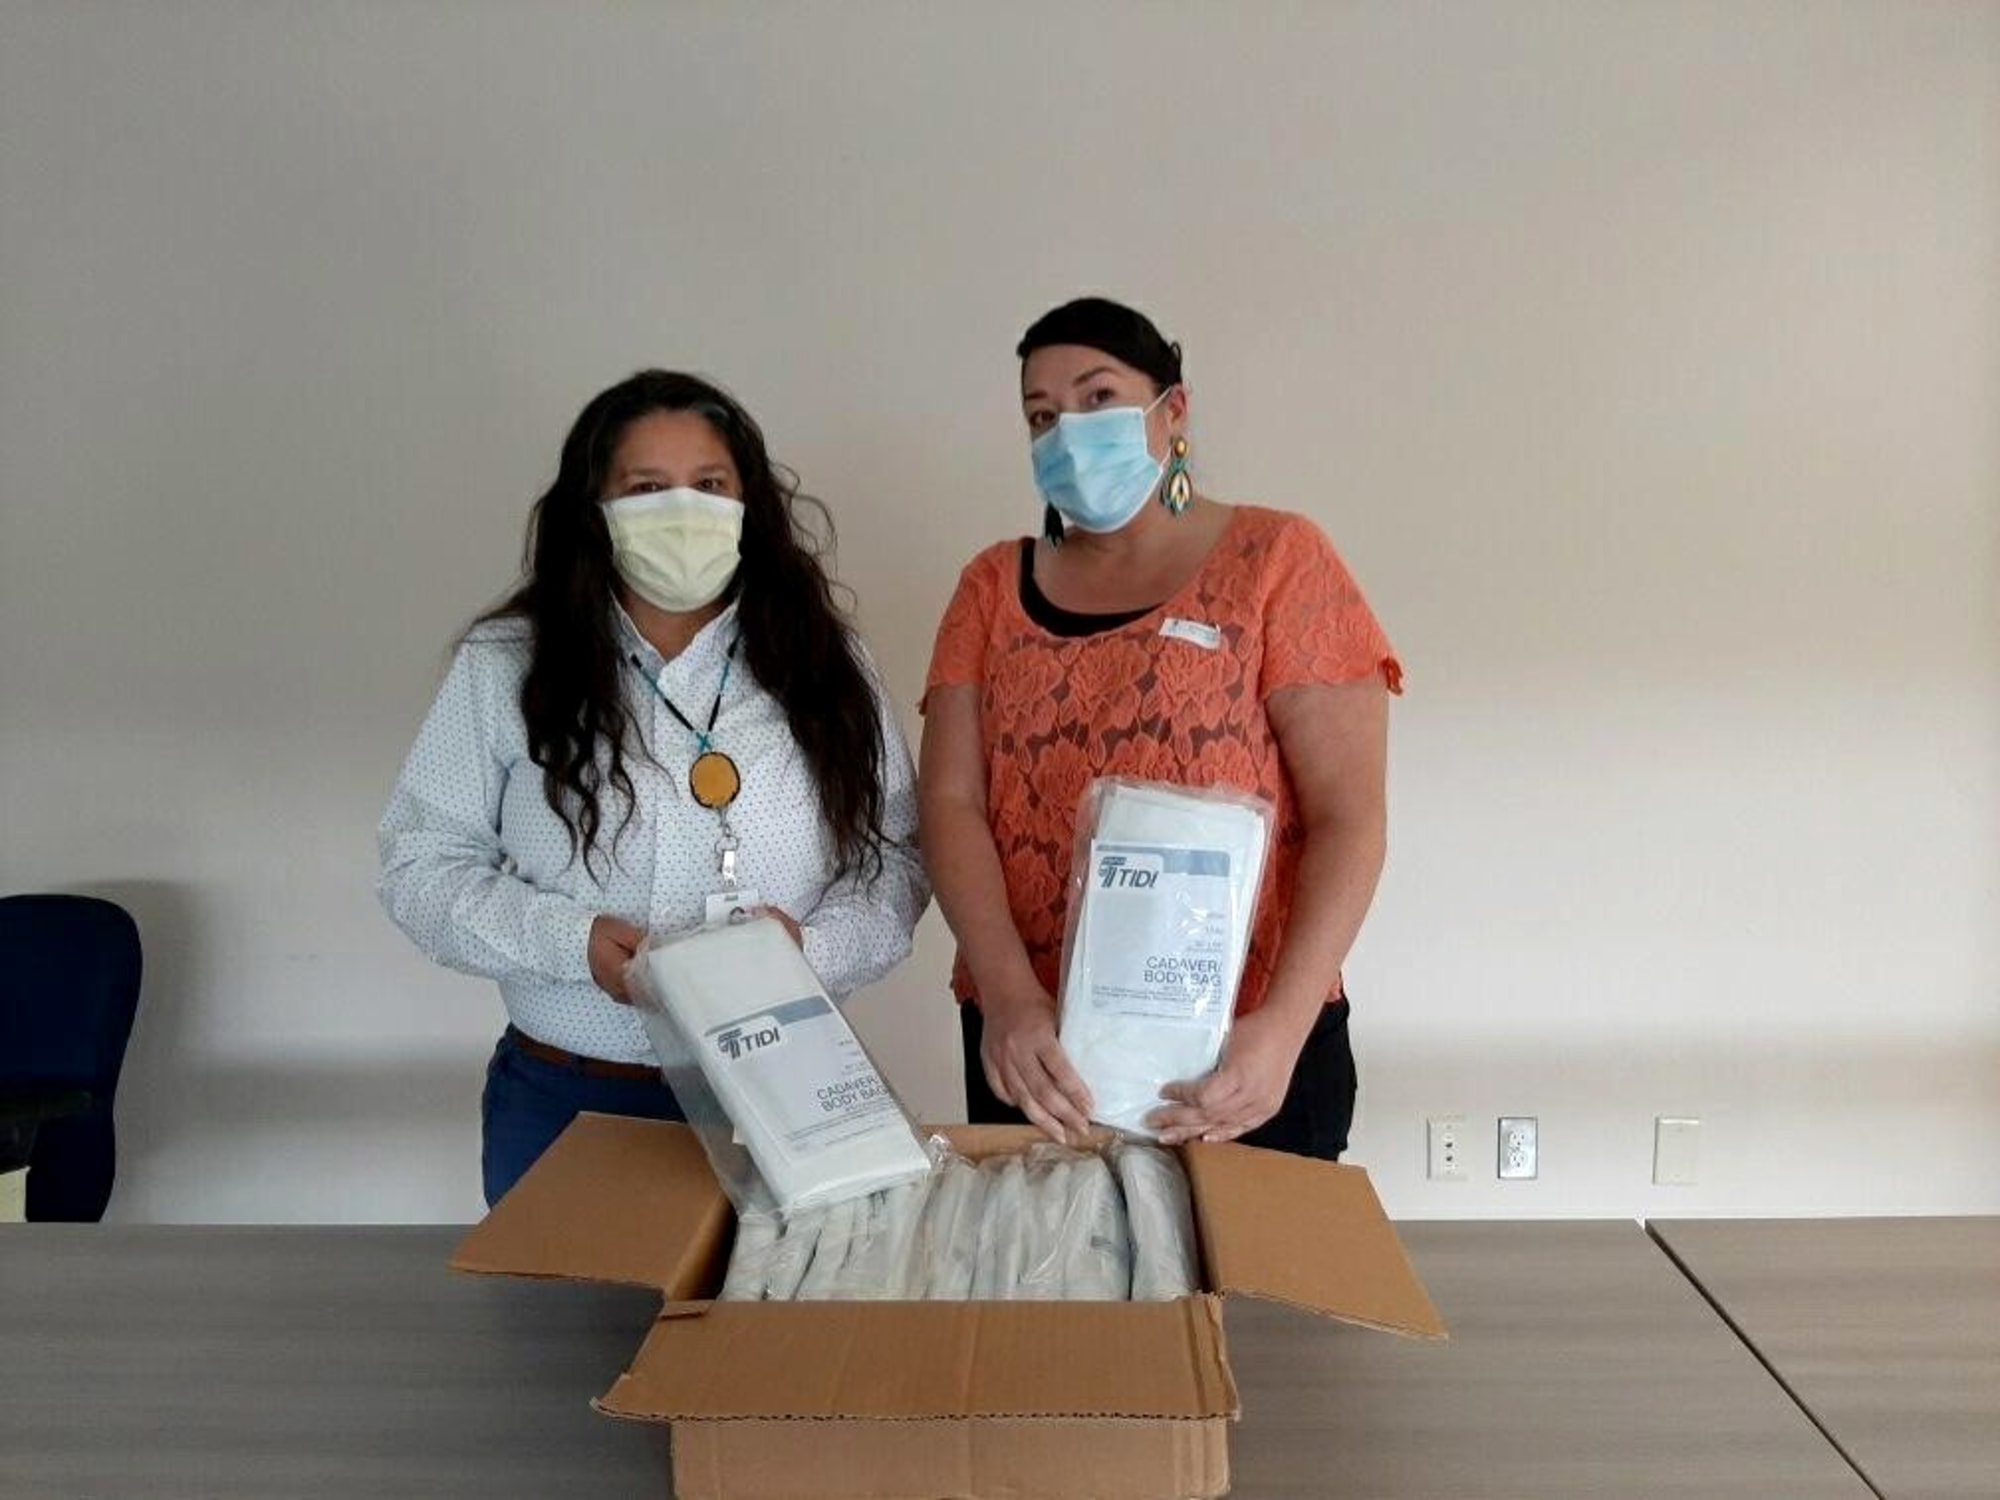 Native American health center asked for COVID-19 supplies. It got body bags instead